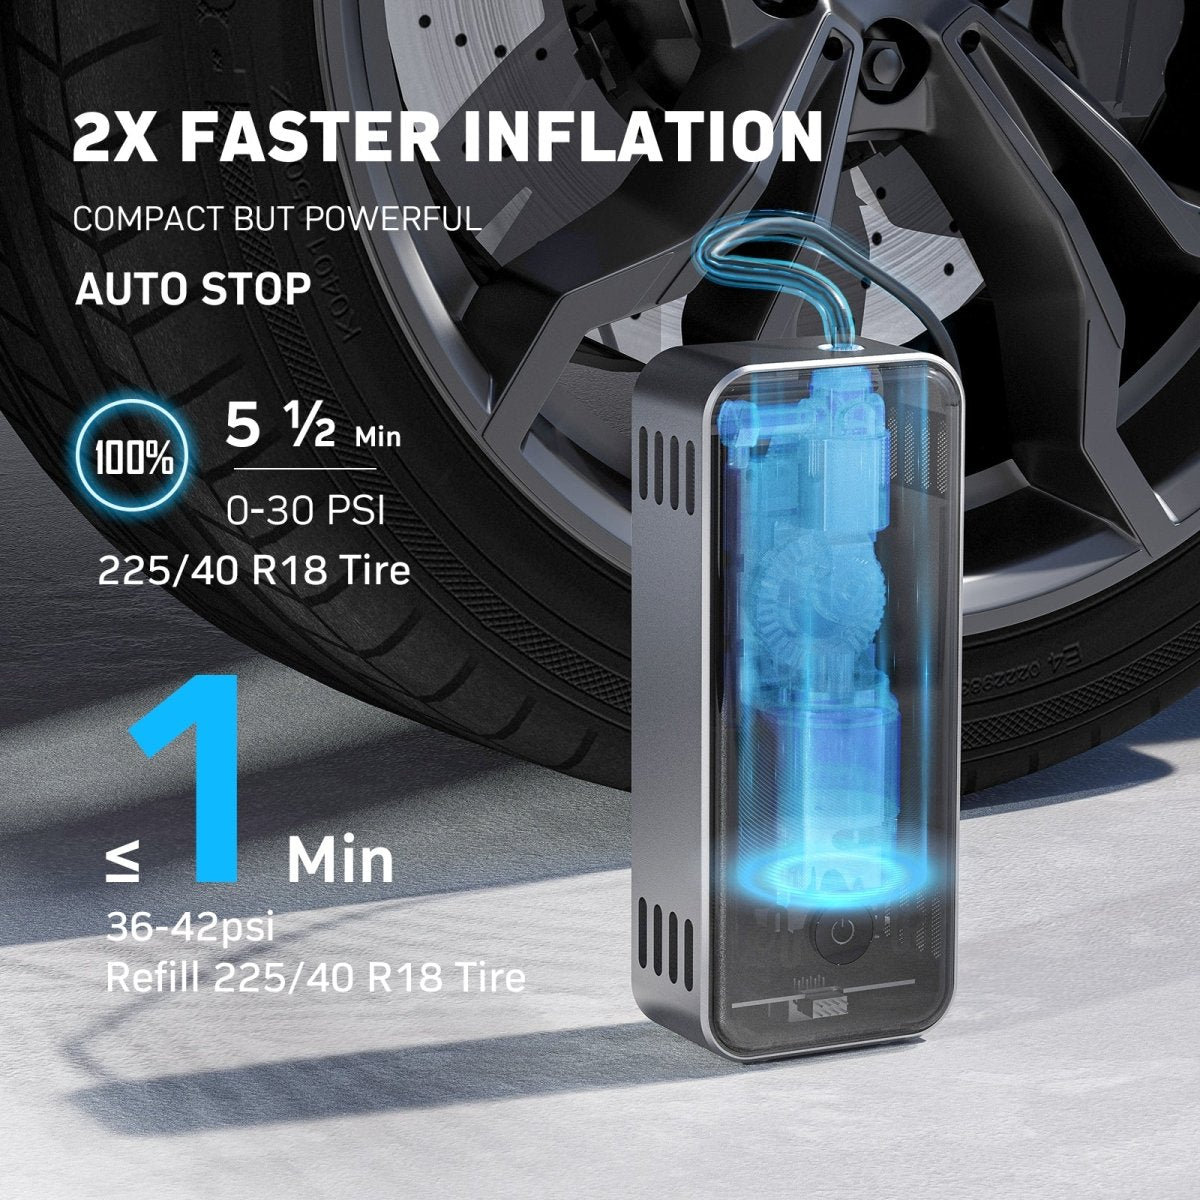 Fast Free Shipping TODAY! Portable Tire Inflator